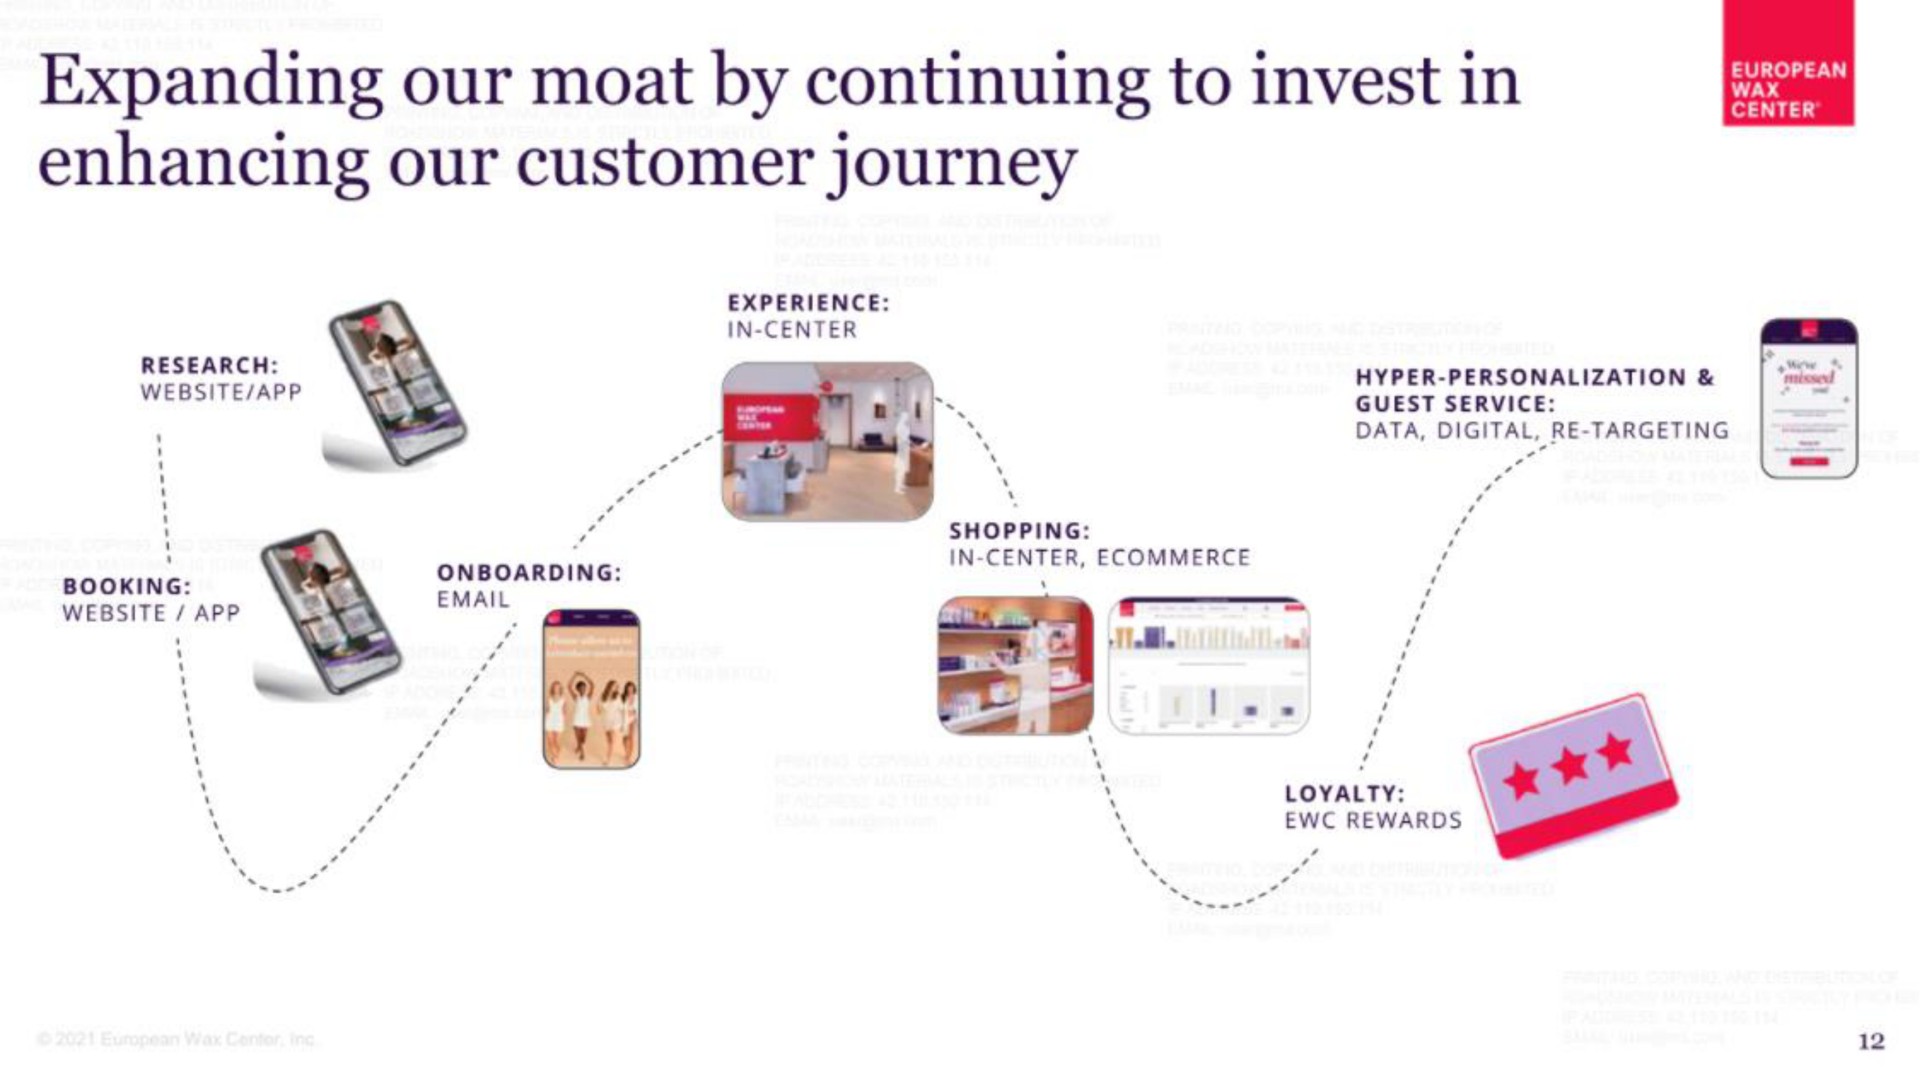 expanding our moat by continuing to invest in enhancing our customer journey | European Wax Center